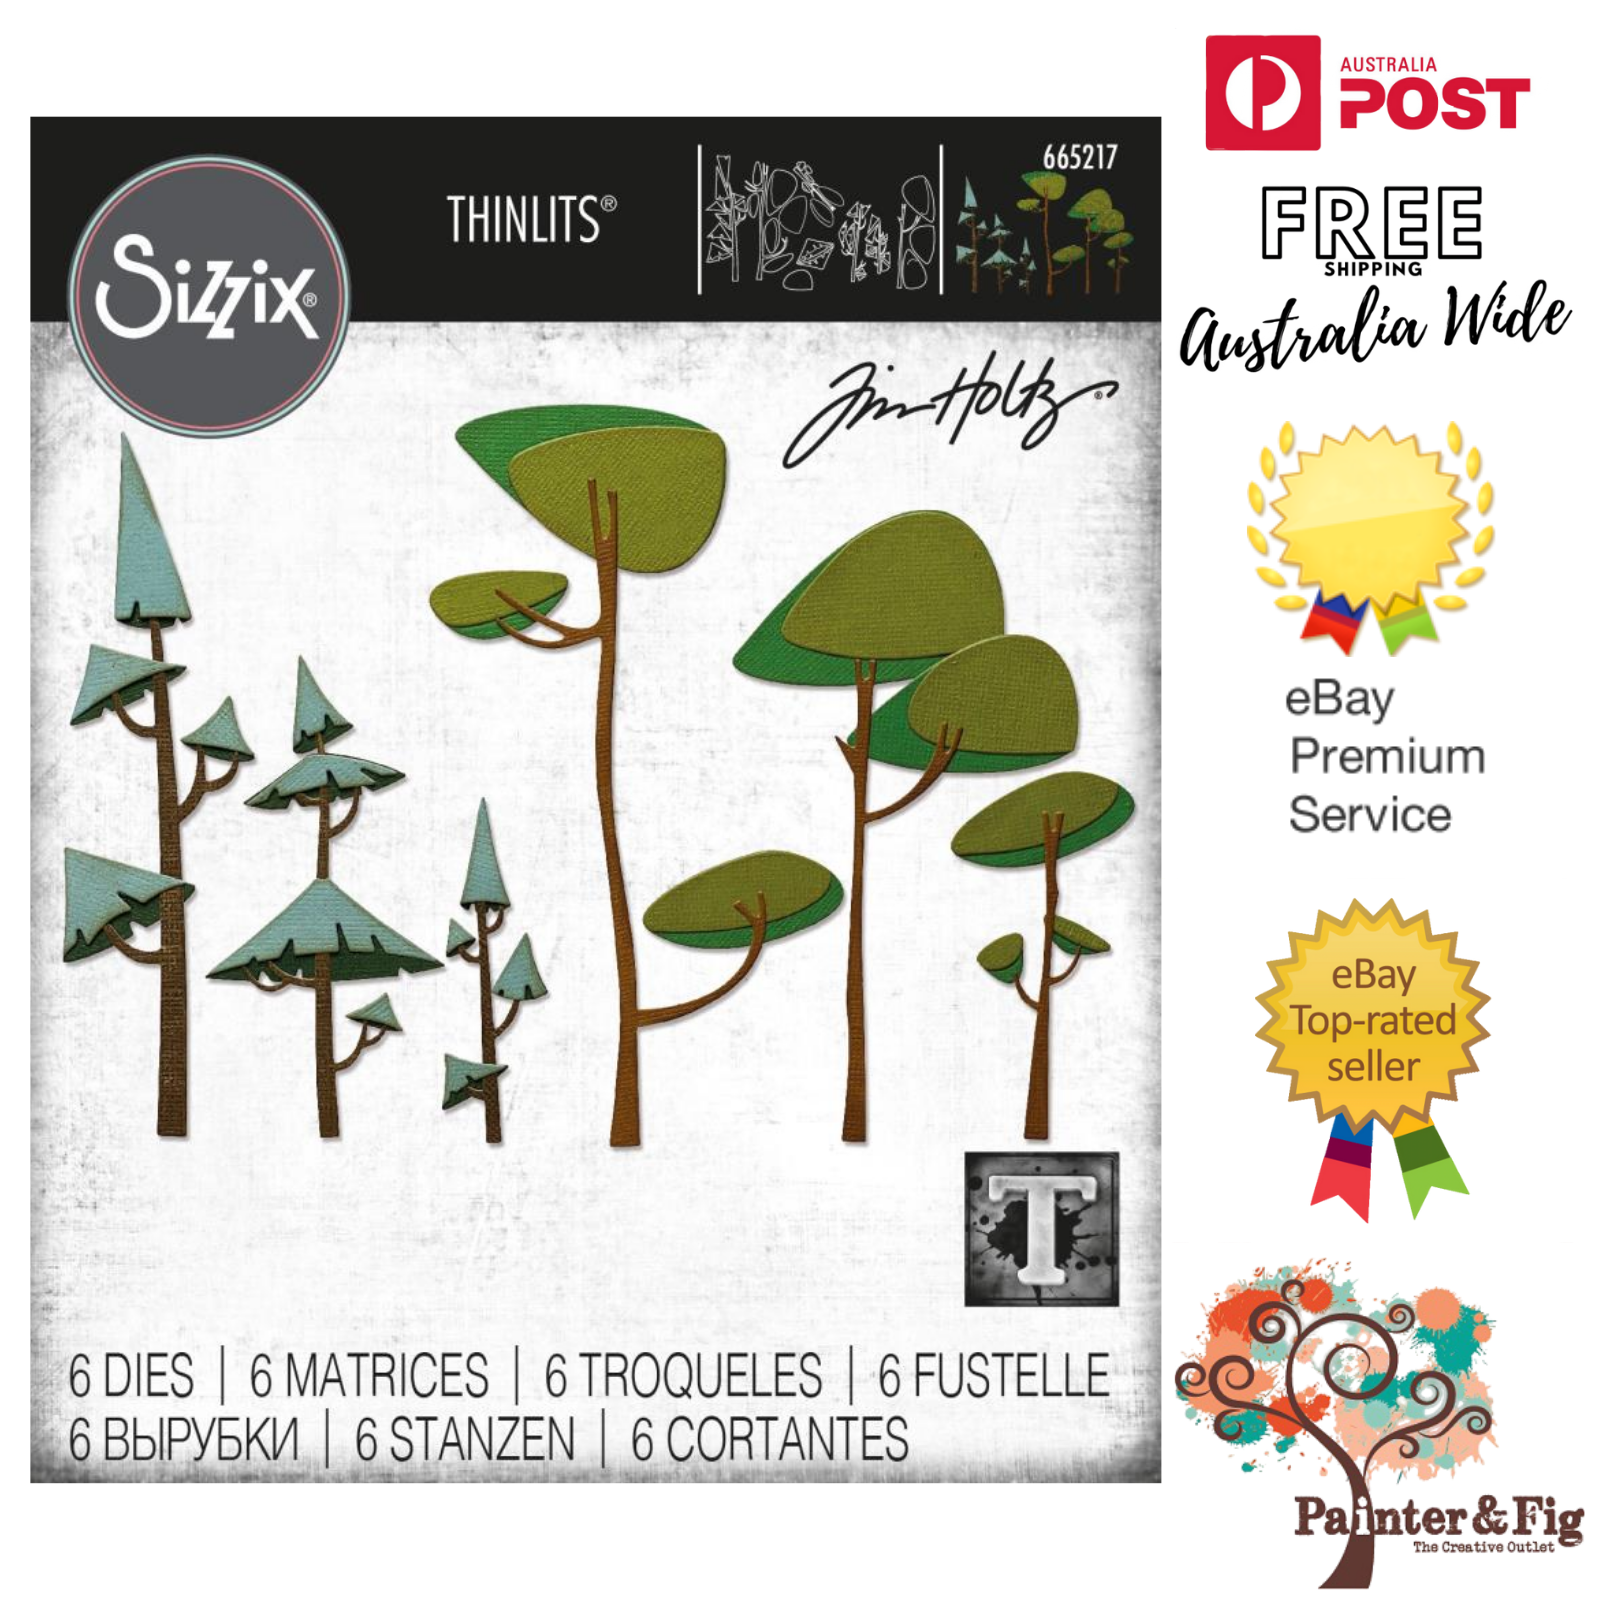 Tim Holtz Funky Trees Dies - Treetops, Trunks, Shrub, Stems - 665217 - Featuring 2 styles of tress with 3 different sizes